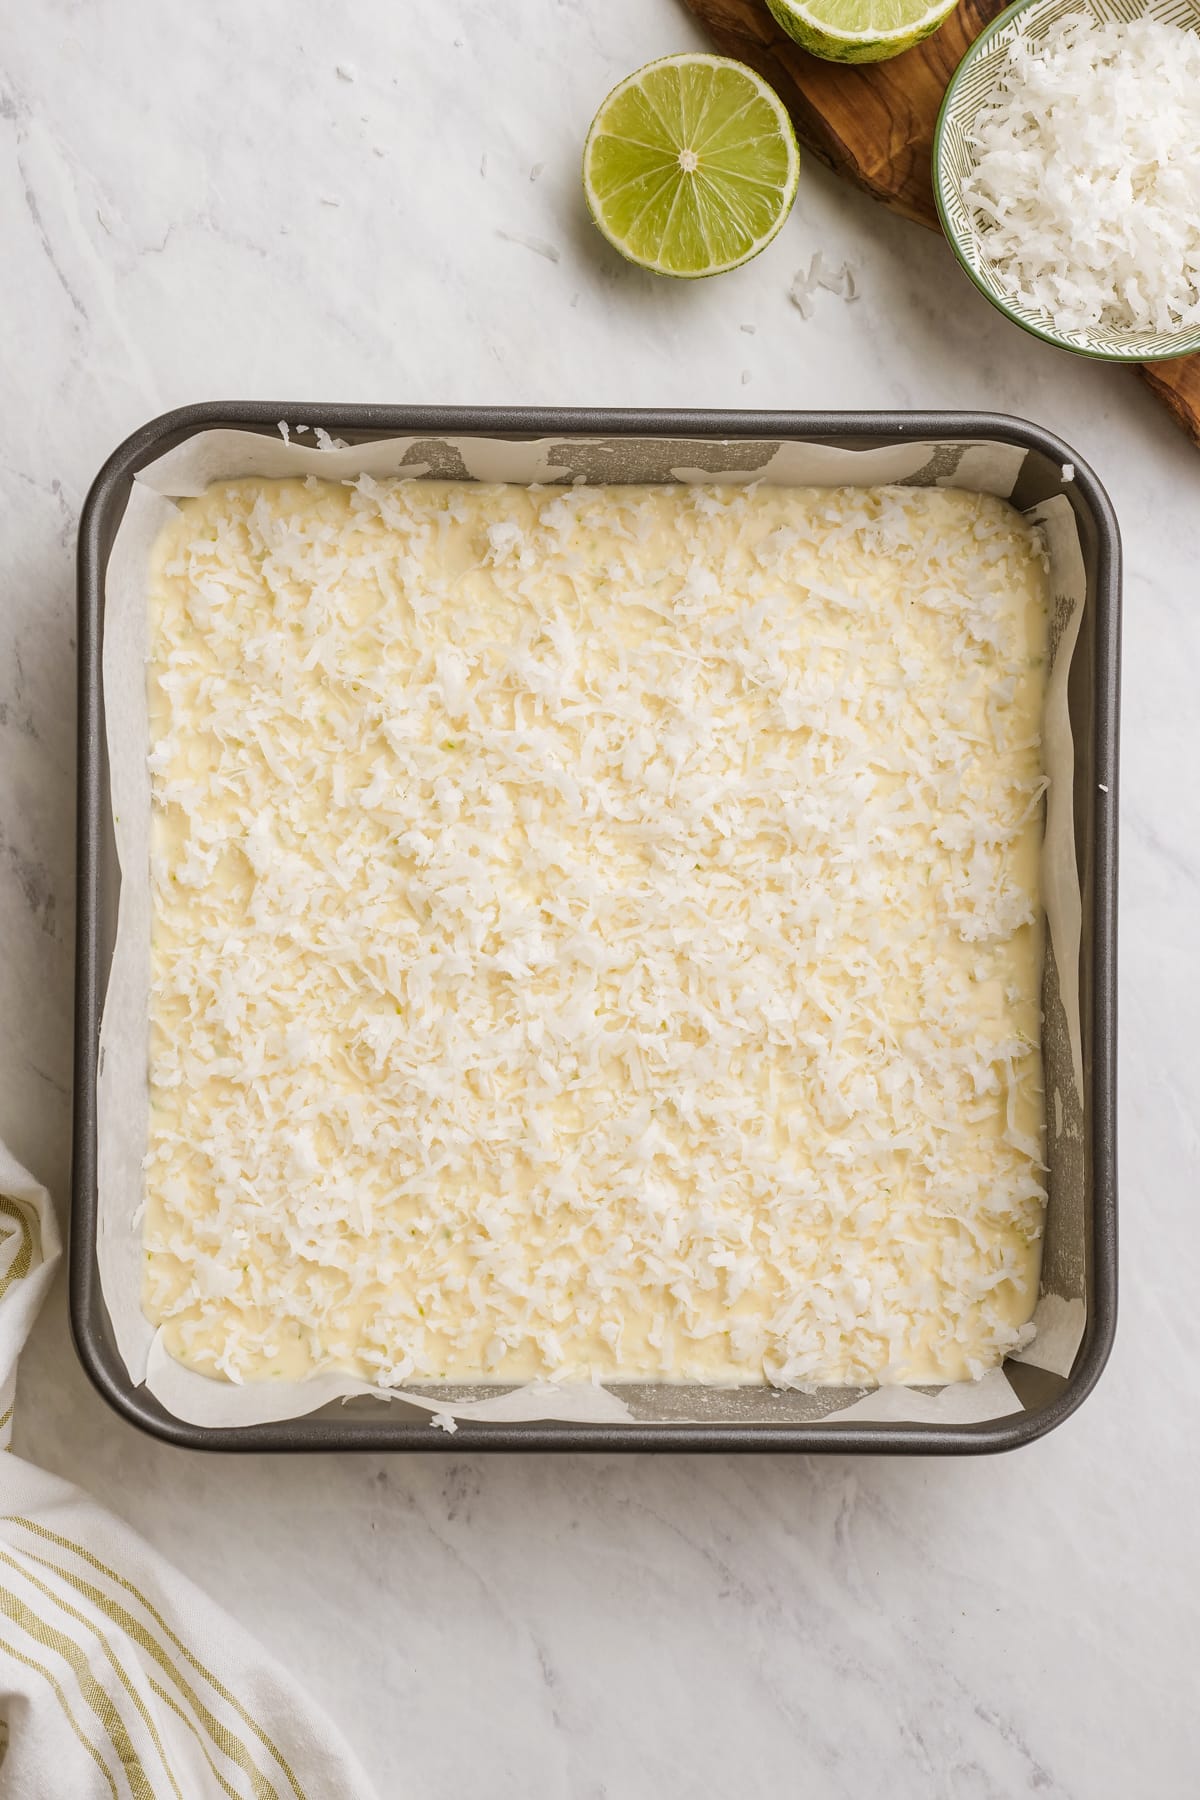 uncooked coconut bars in baking dish